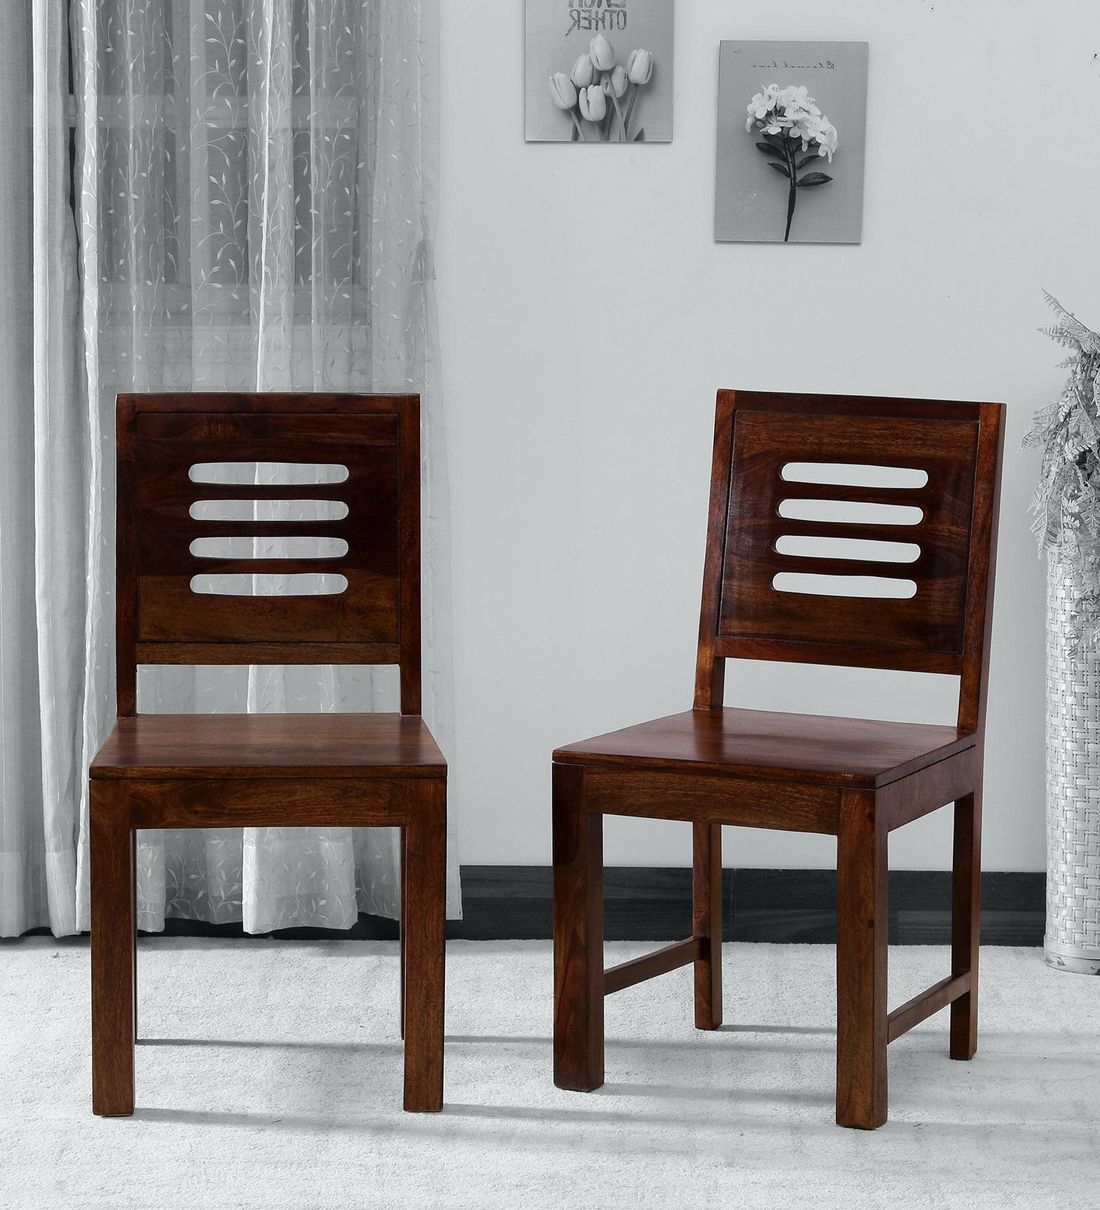 Recent Walnut Solid Wood Garden Benches Intended For Marin Solid Wood Dining Chair (set Of 2) In Walnut Finish (View 23 of 30)